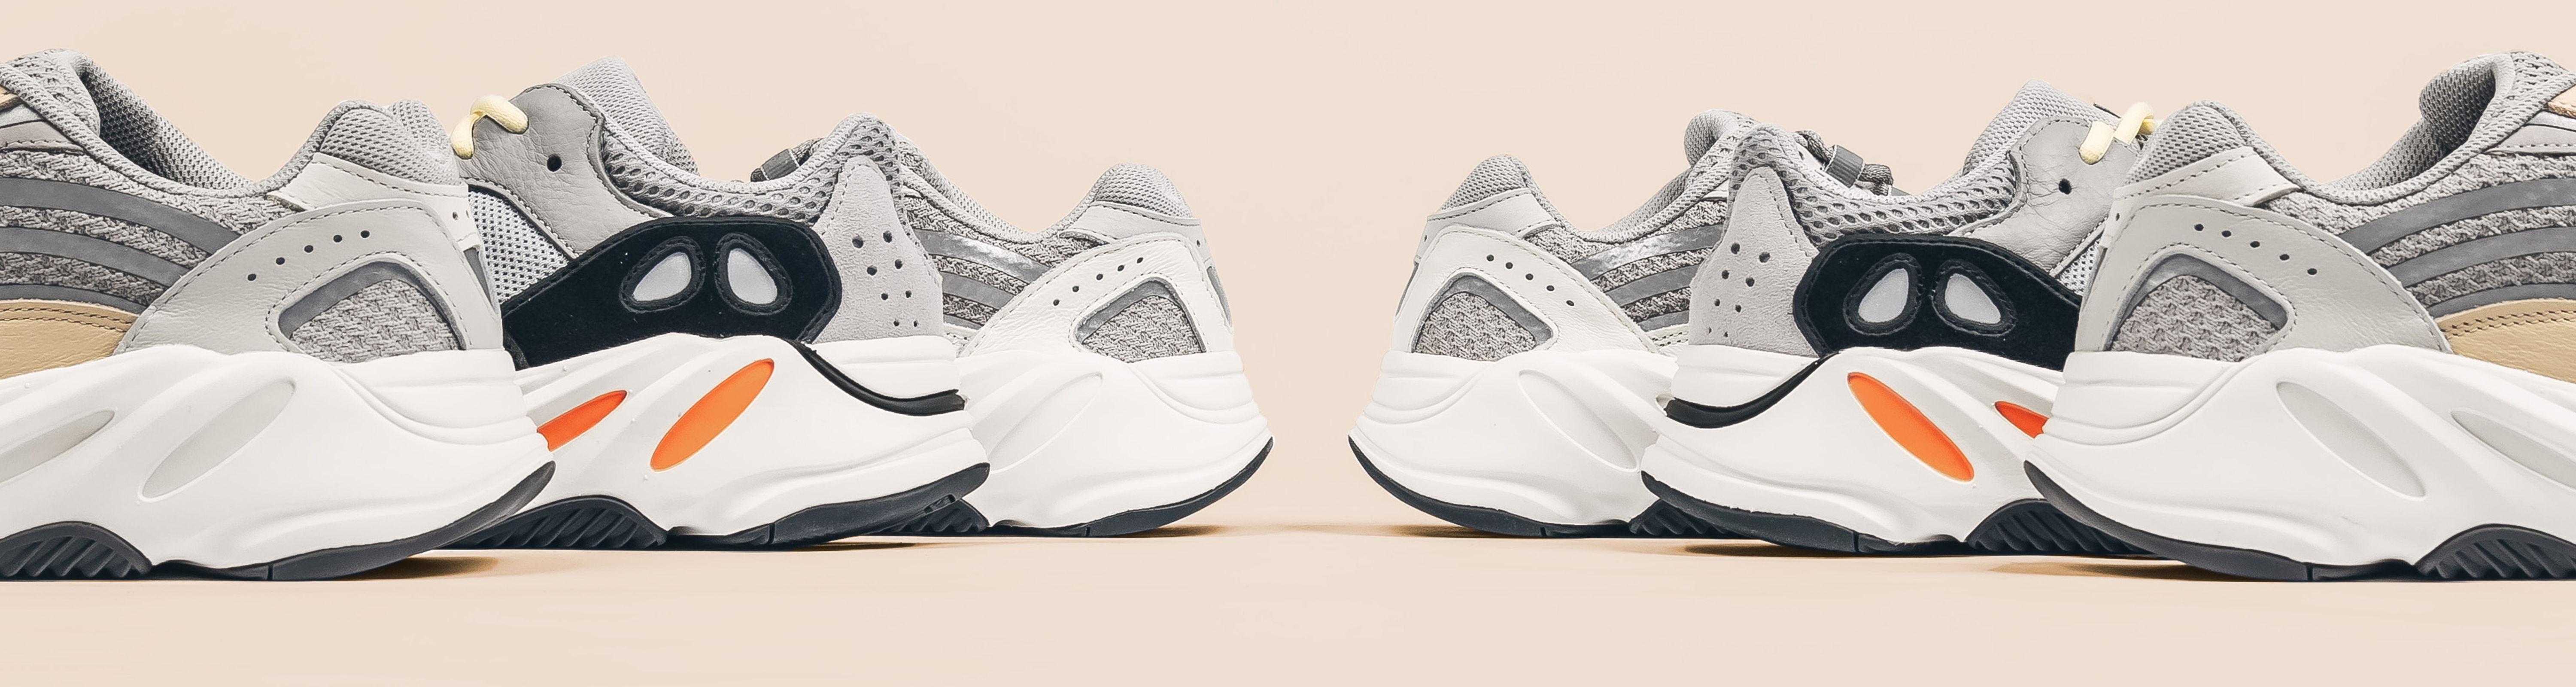 How Does the Yeezy Boost 700 Fit? Yeezy 700 Sizing, Styling and More